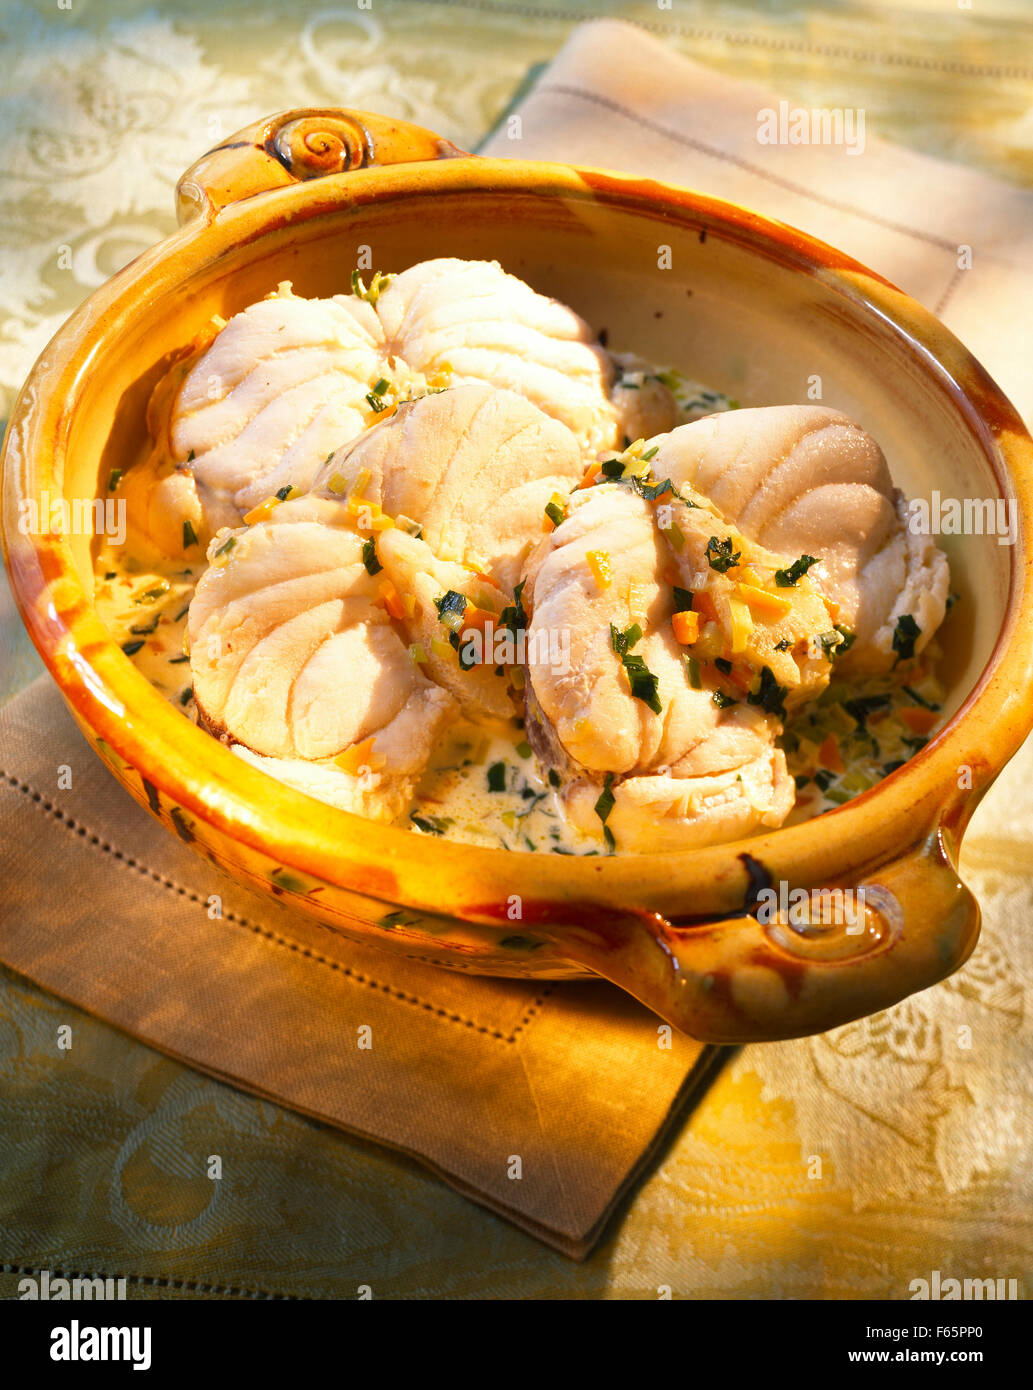 Monfish and vegetables in creamy sauce Stock Photo